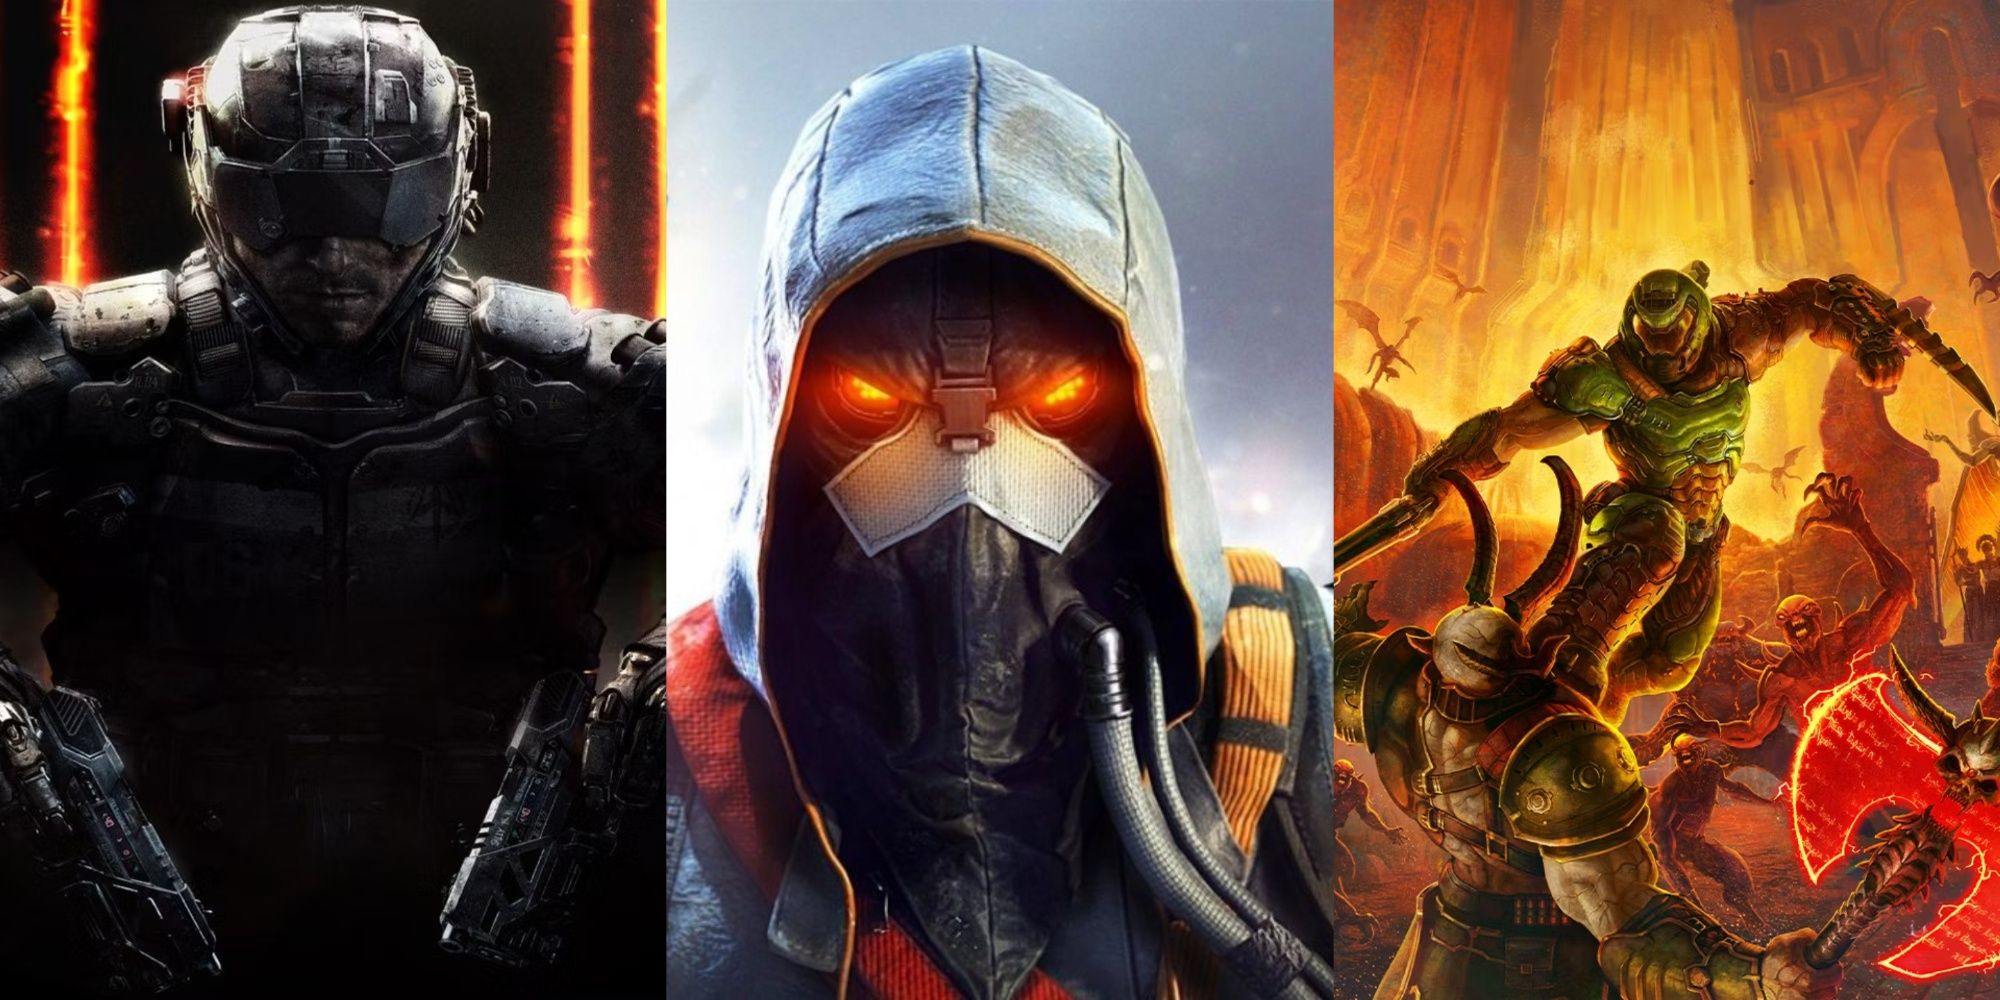 Three-image collage of the key game art for COD: Black Ops 3, Killzone Shadow Fall, and Doom Eternal.